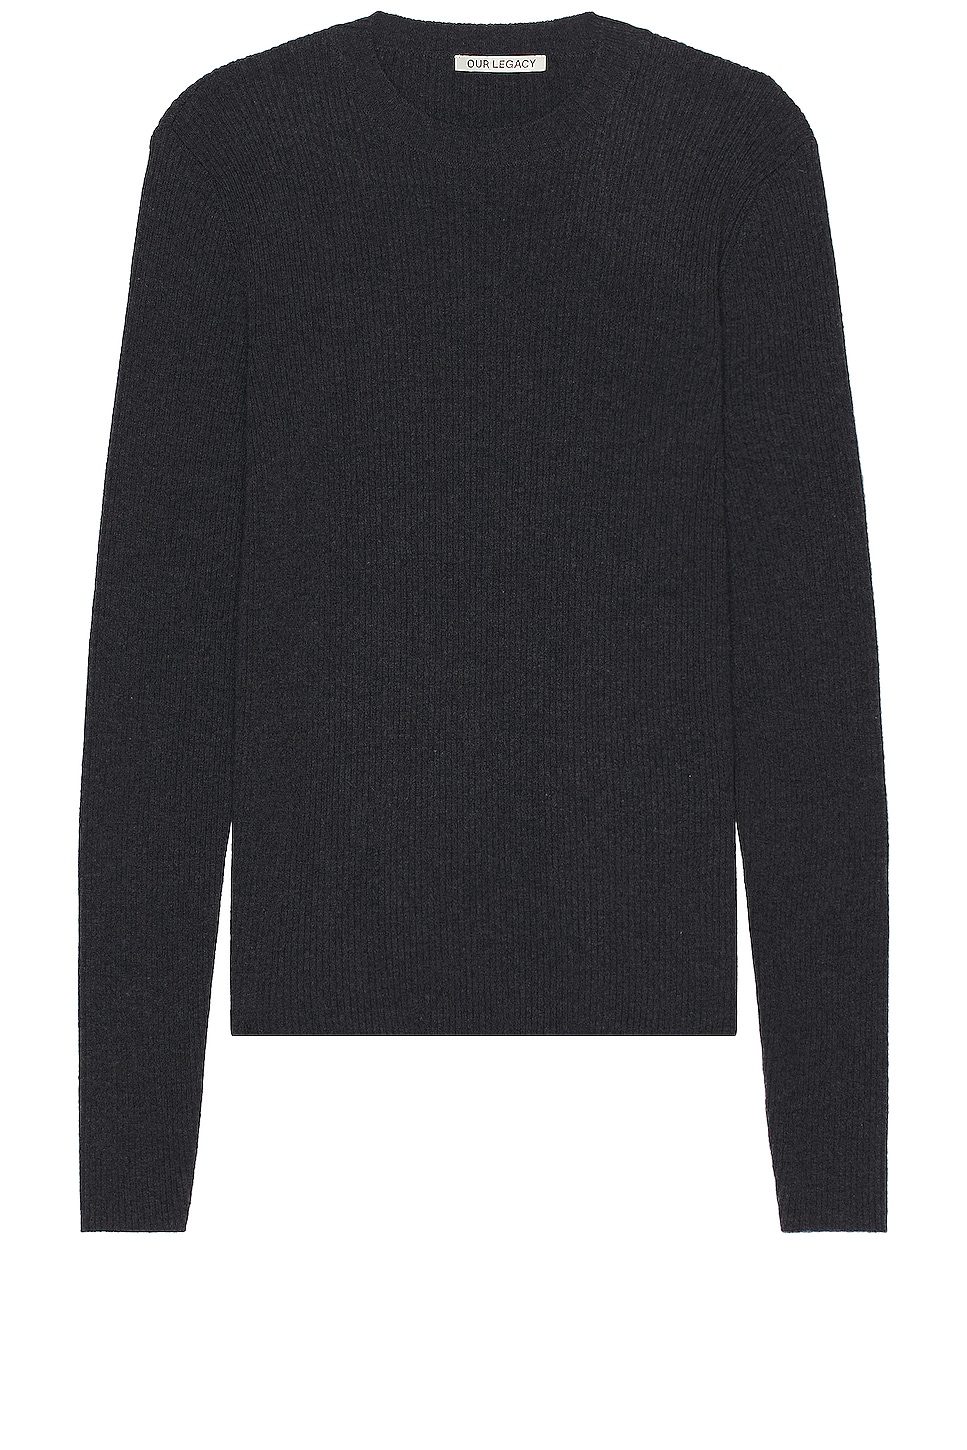 Compact Roundneck in Charcoal